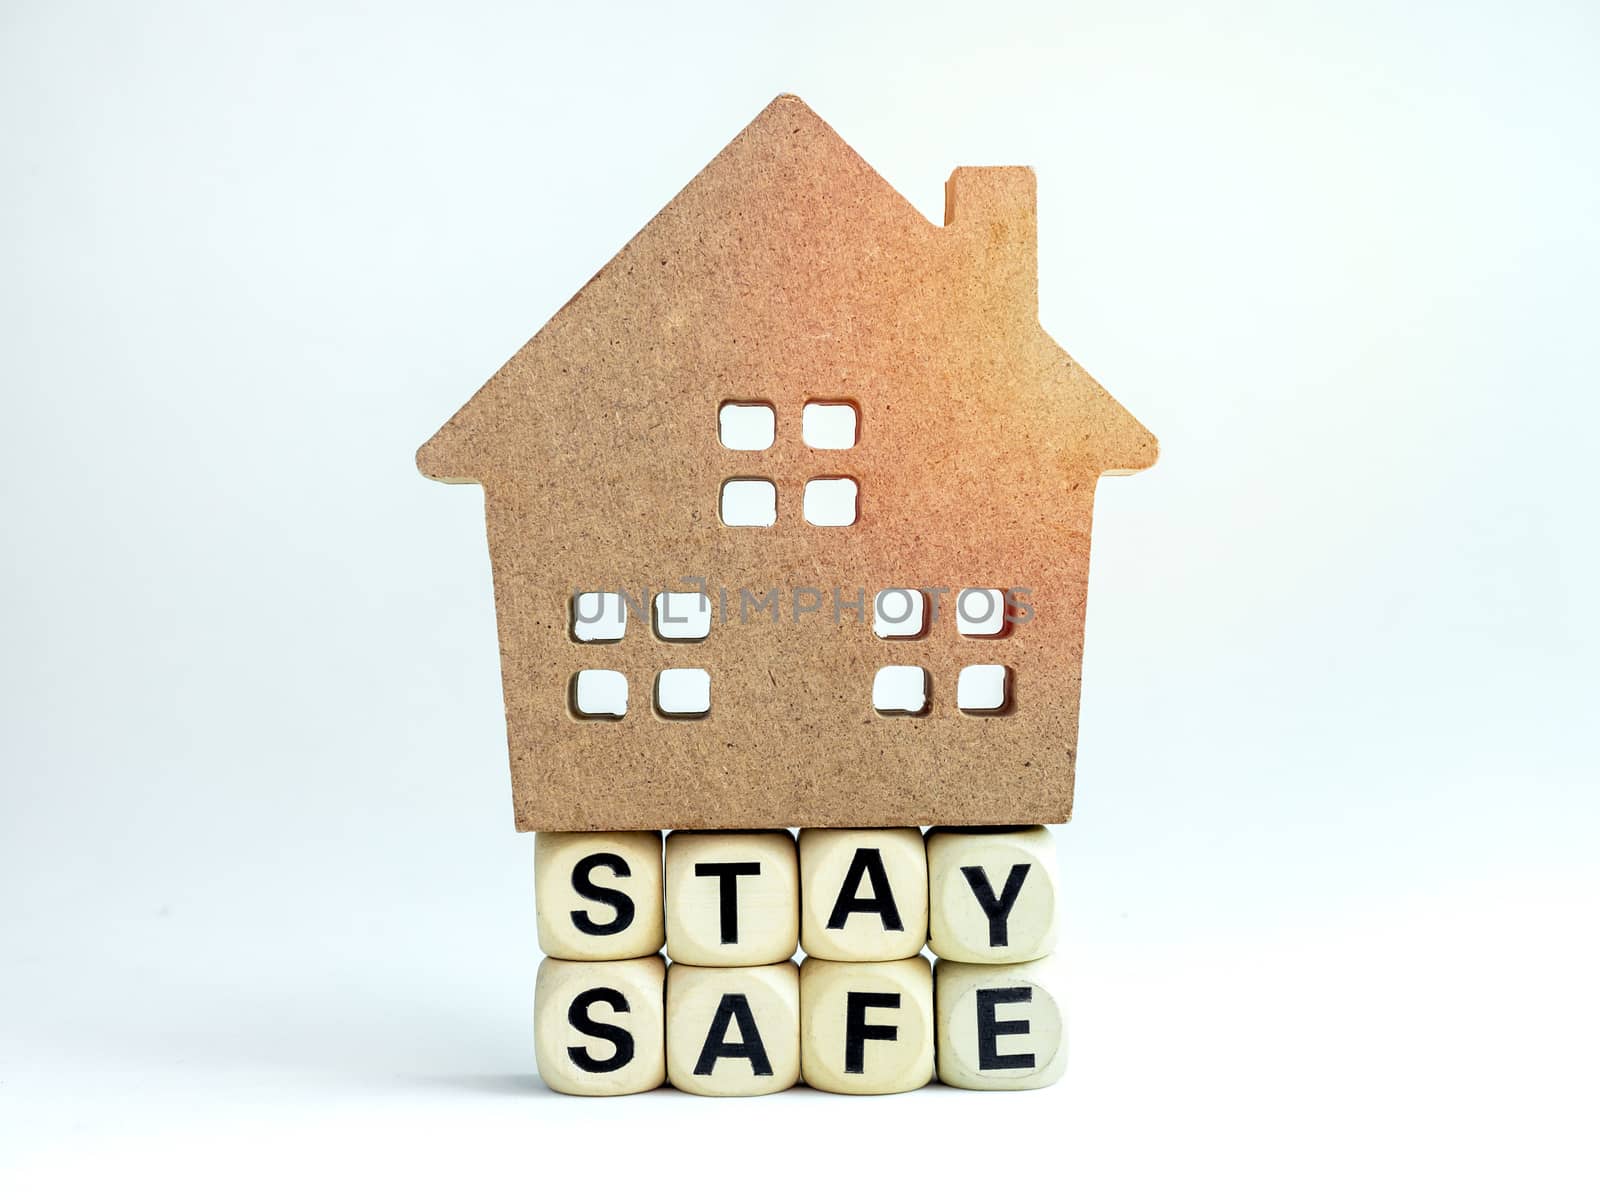 Stay safe concept. Word "Stay Safe" with wooden house isolated on white background, stay at home, social media campaign for covid-19 or coronavirus pandemic prevention.